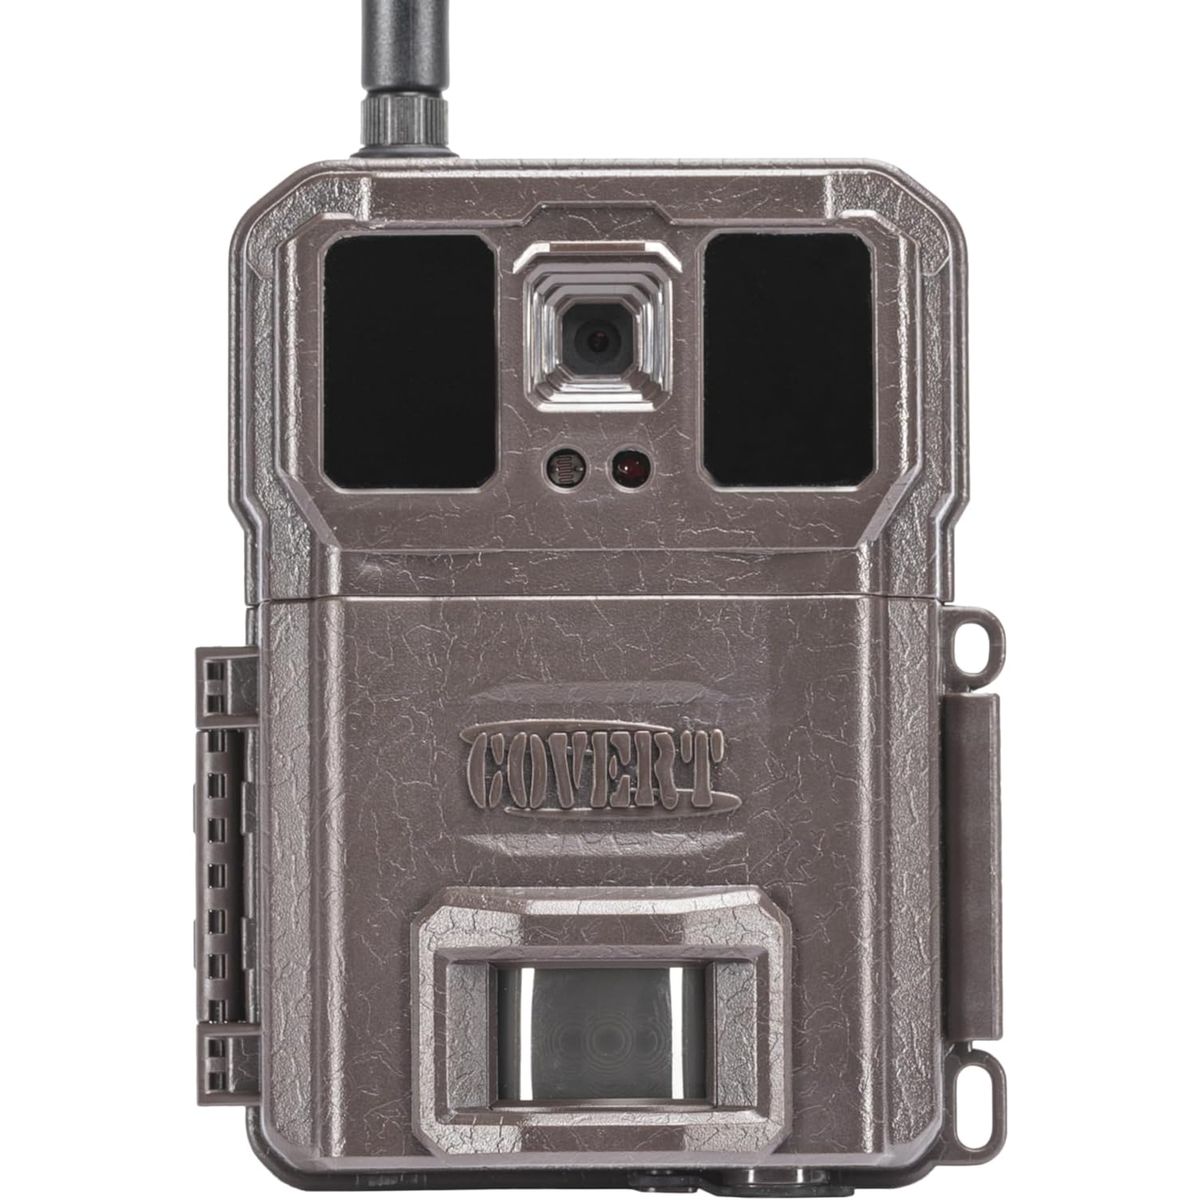 Photos - Other Covert Covert® Scouting Outdoor Cellular Game & Trail Camera, WC30-A - 276